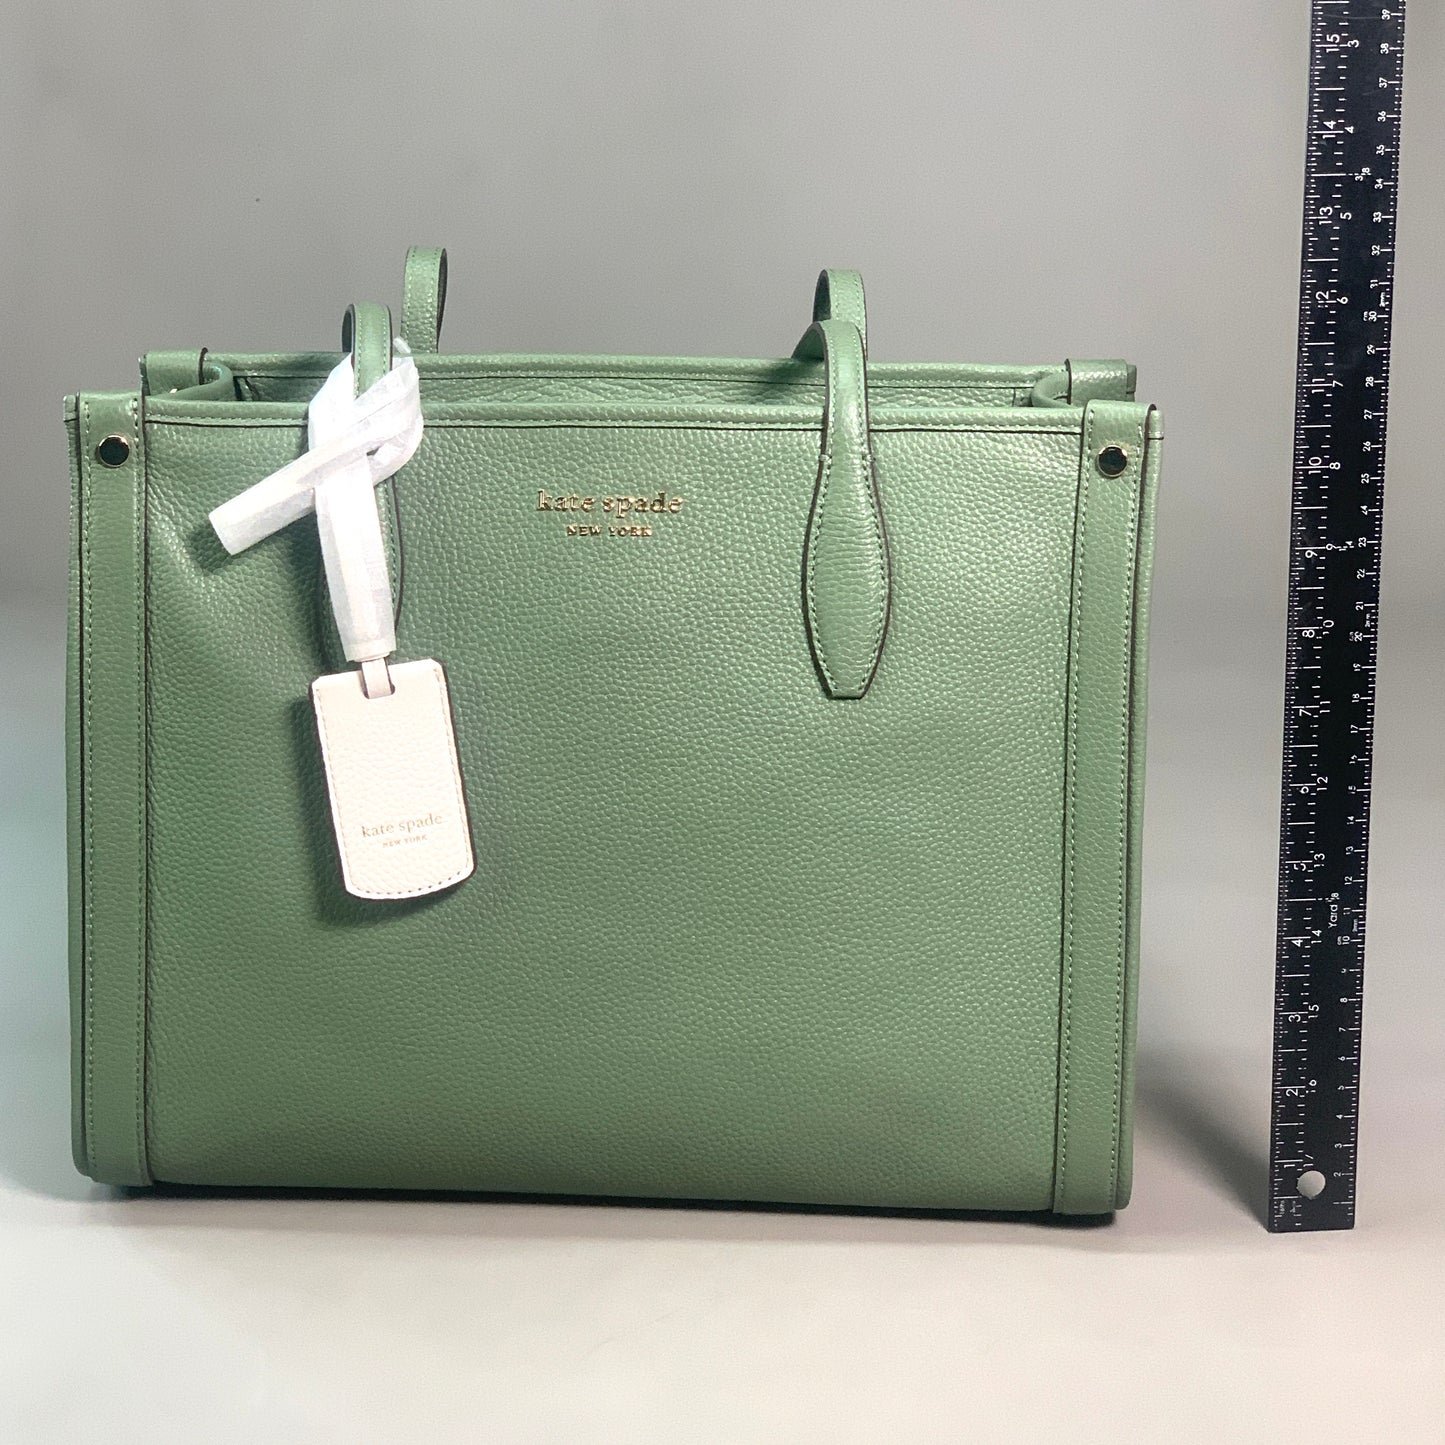 KATE SPADE Market Pebbled Leather Medium Tote Romaine Green Style No. K8638-1 (New)